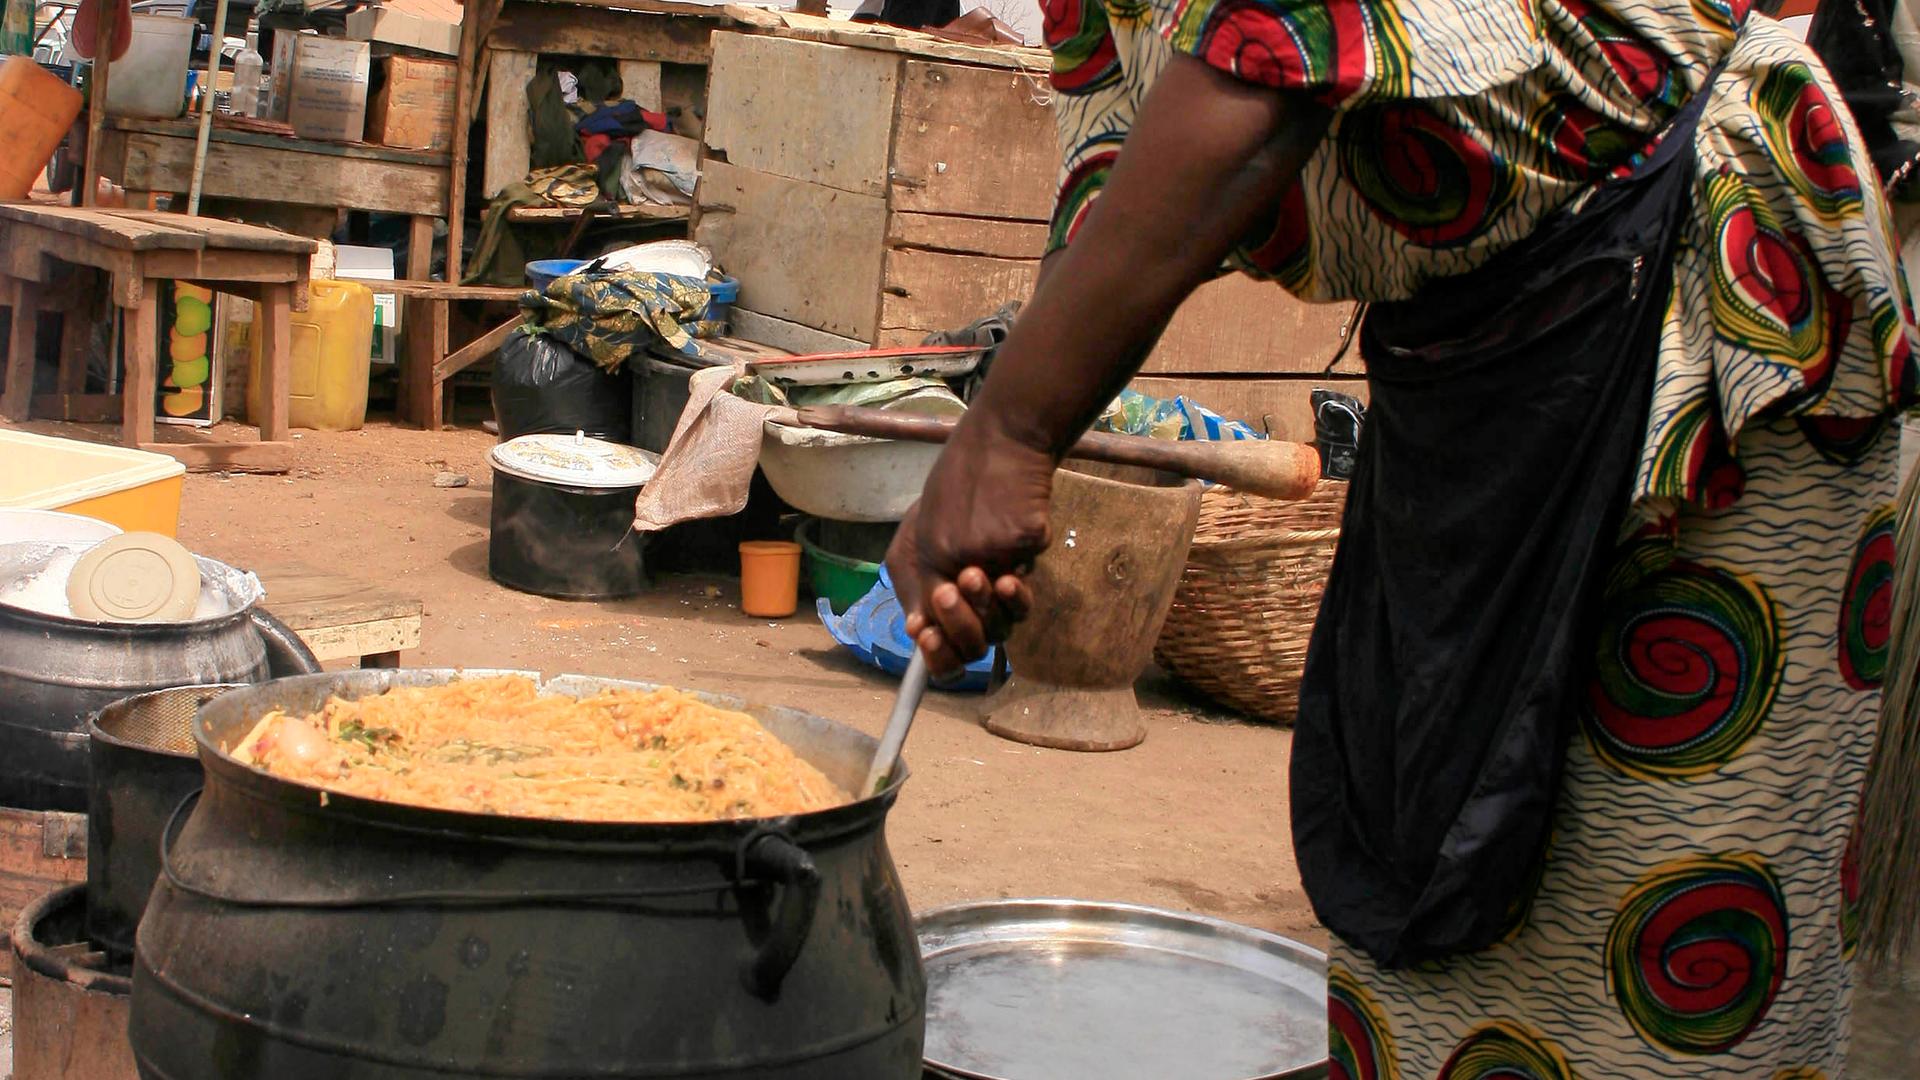 A food vendor prepares "jollof rice," a traditional meal usually made using chicken, in the northern city of Kano.